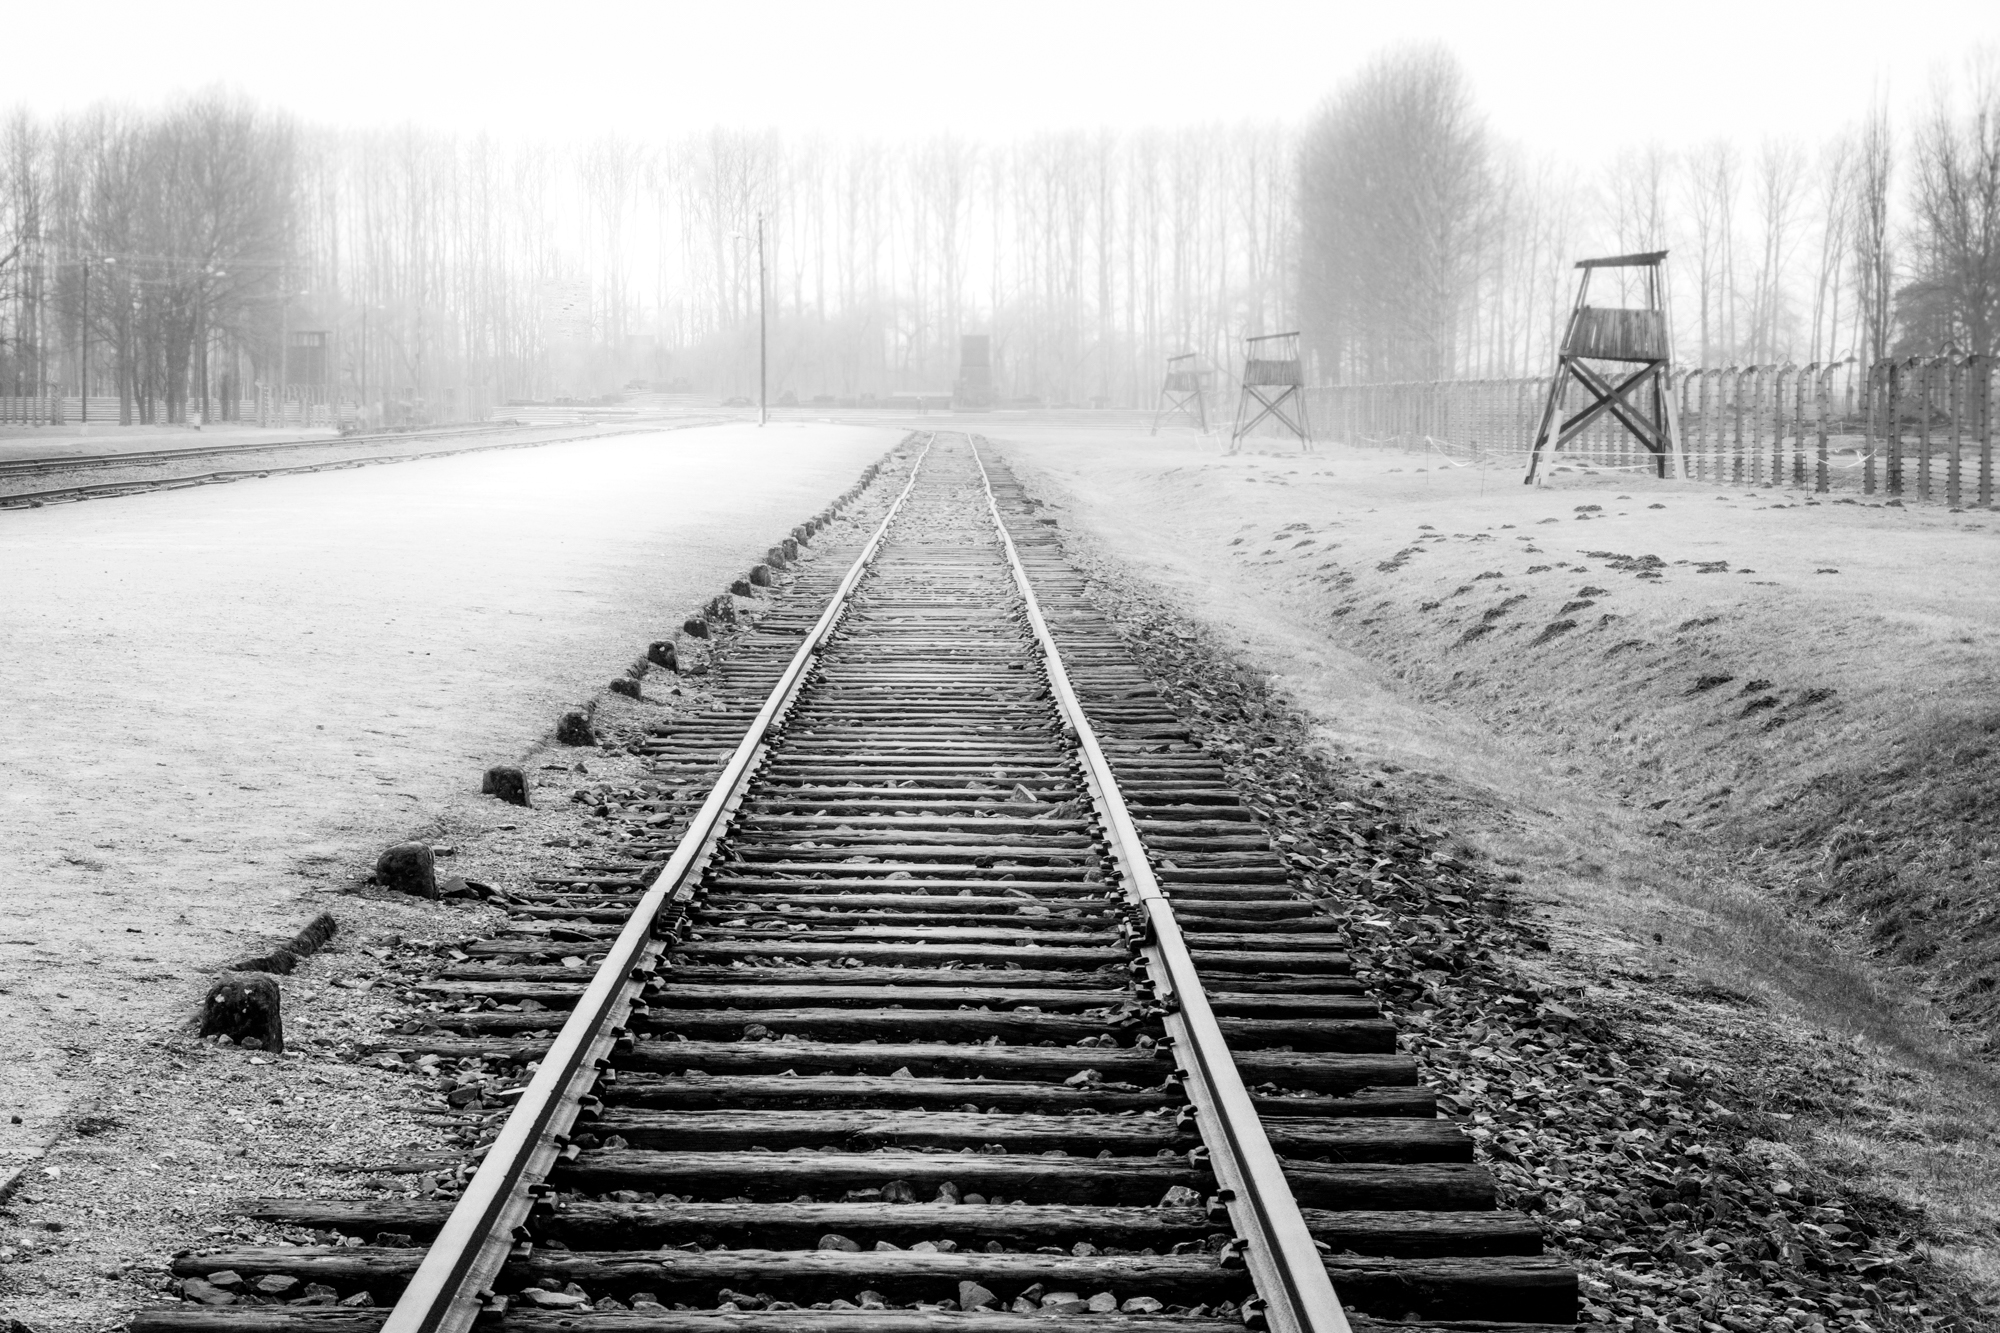 Watchtowers and railway tracks towards endless emptiness at Birkenau